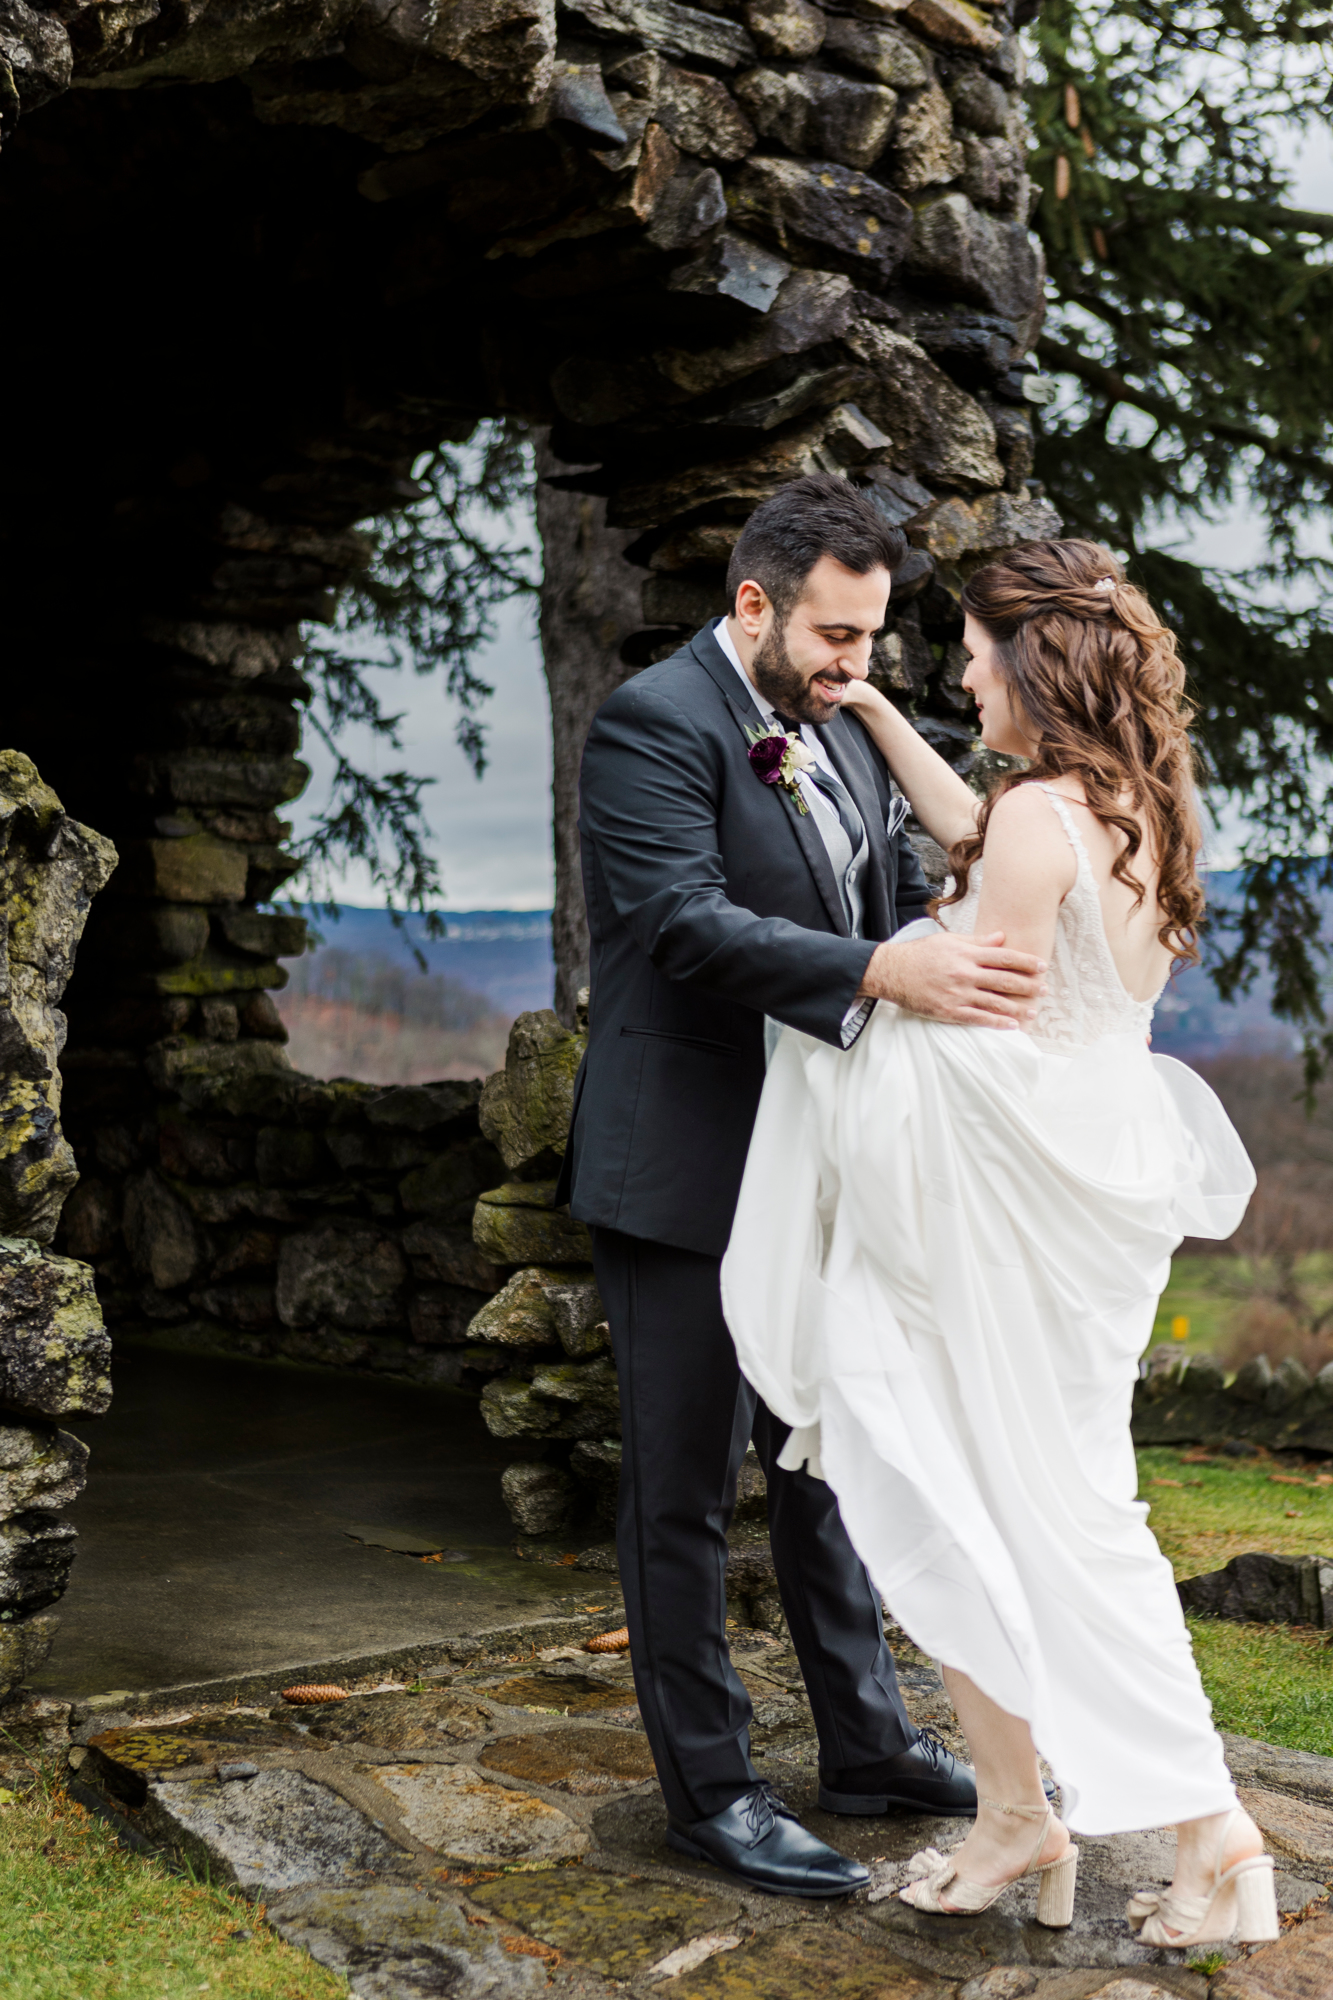 Special wedding photography at The Garrison, NY